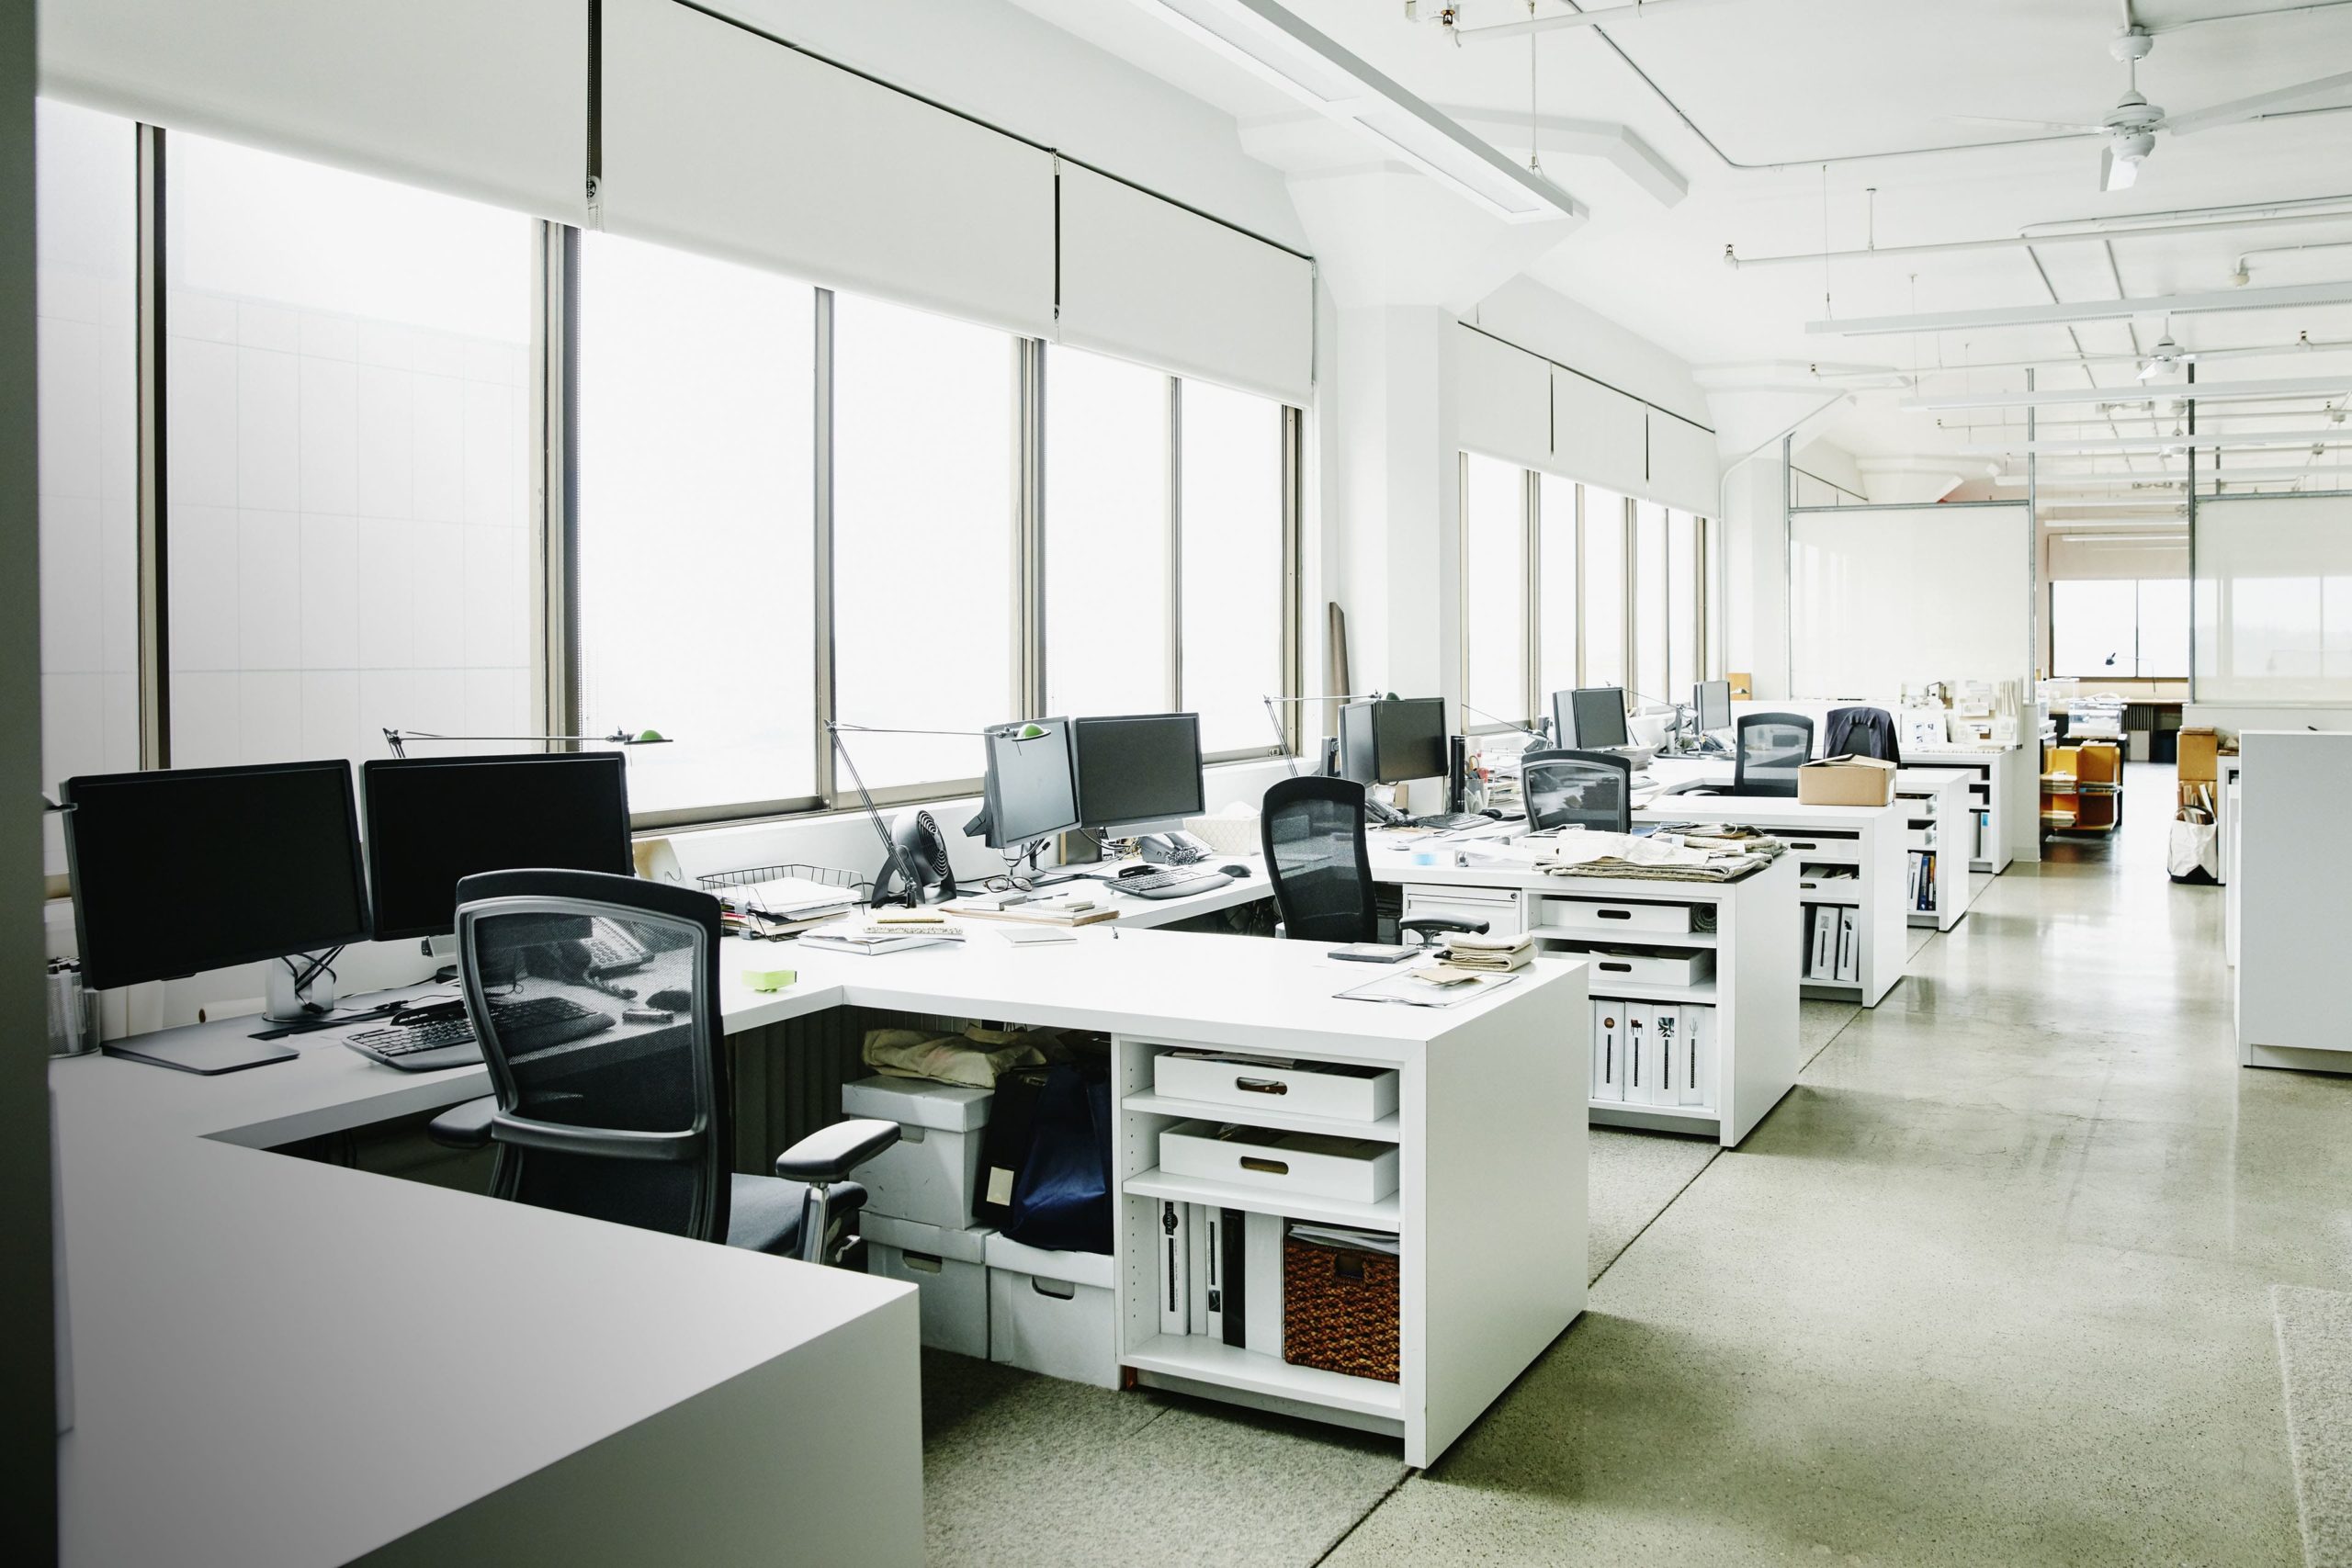 ey-workstations-in-empty-office